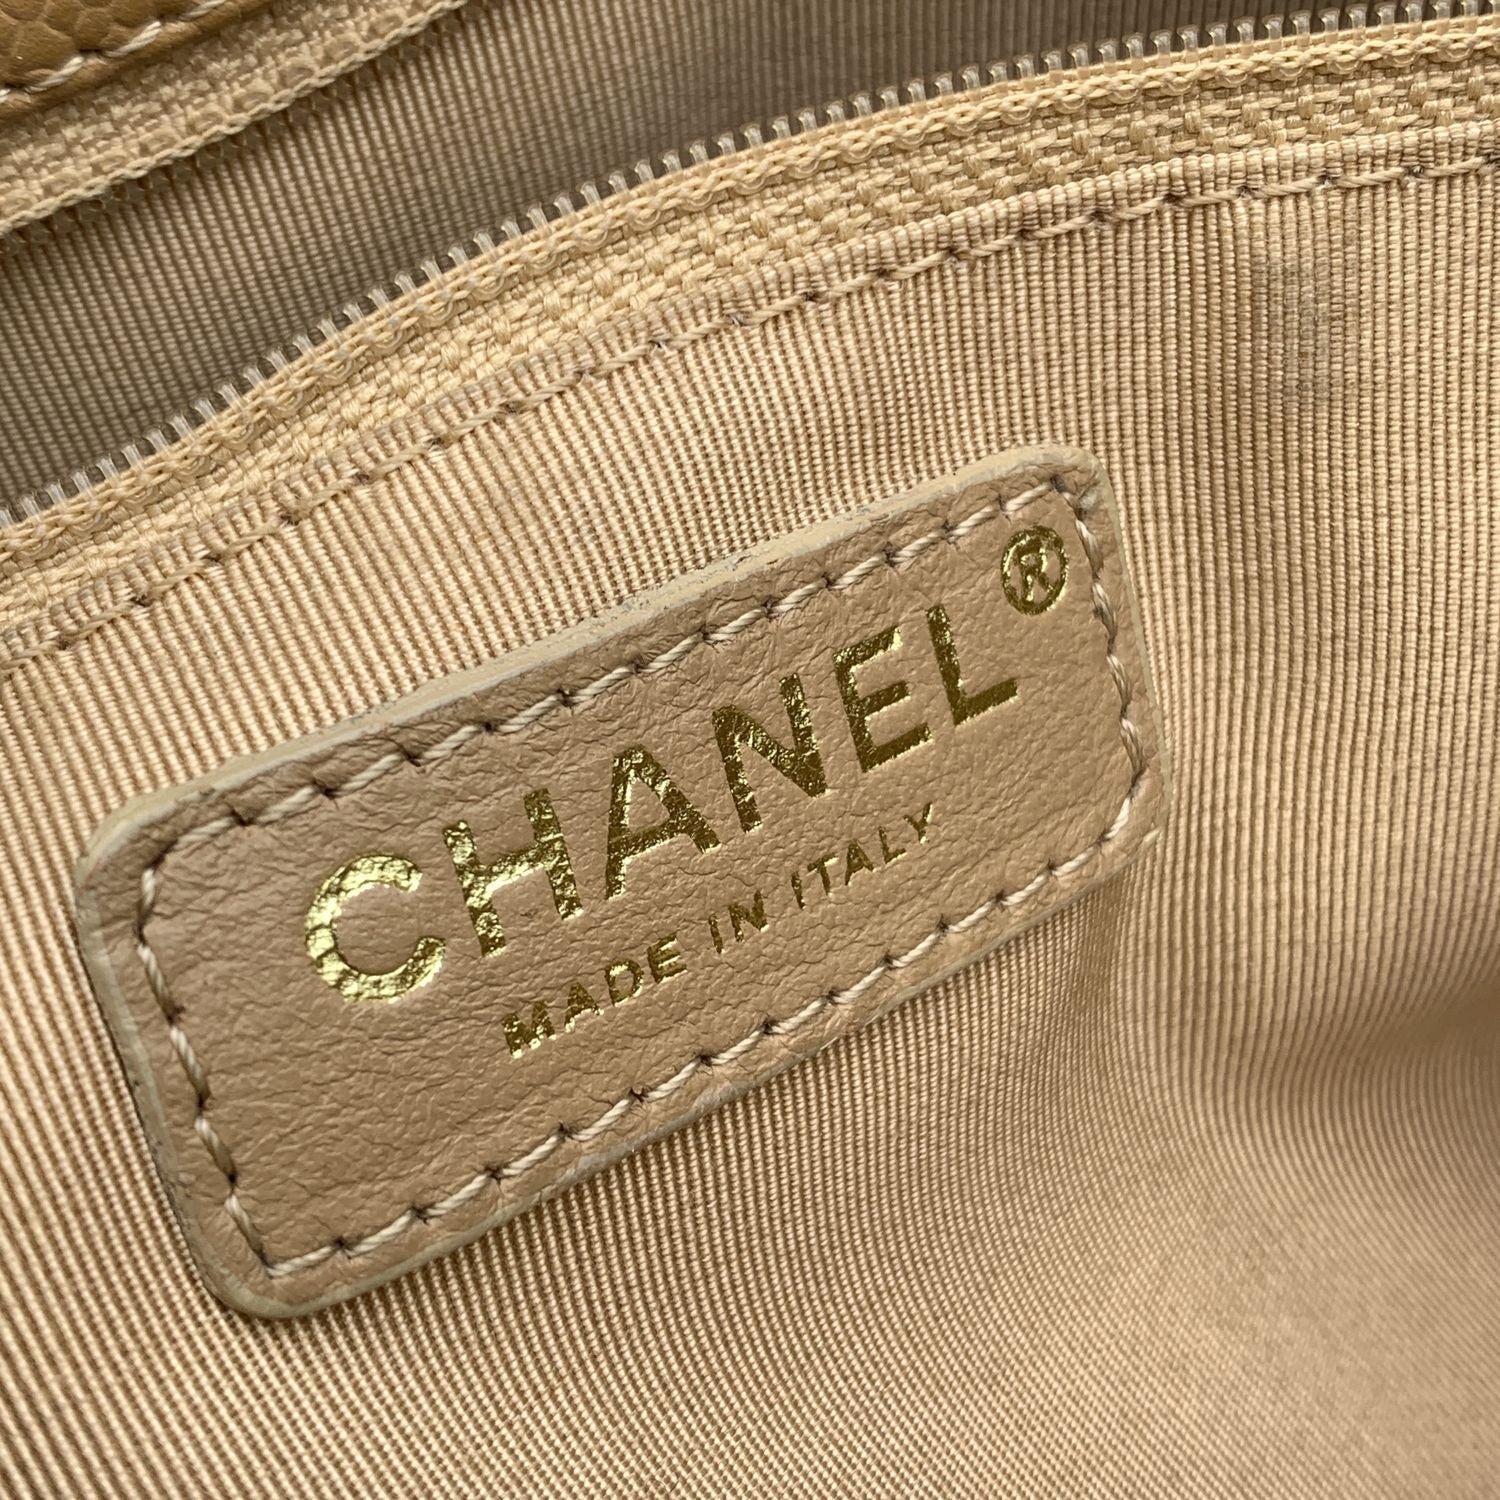 CHANEL Totes